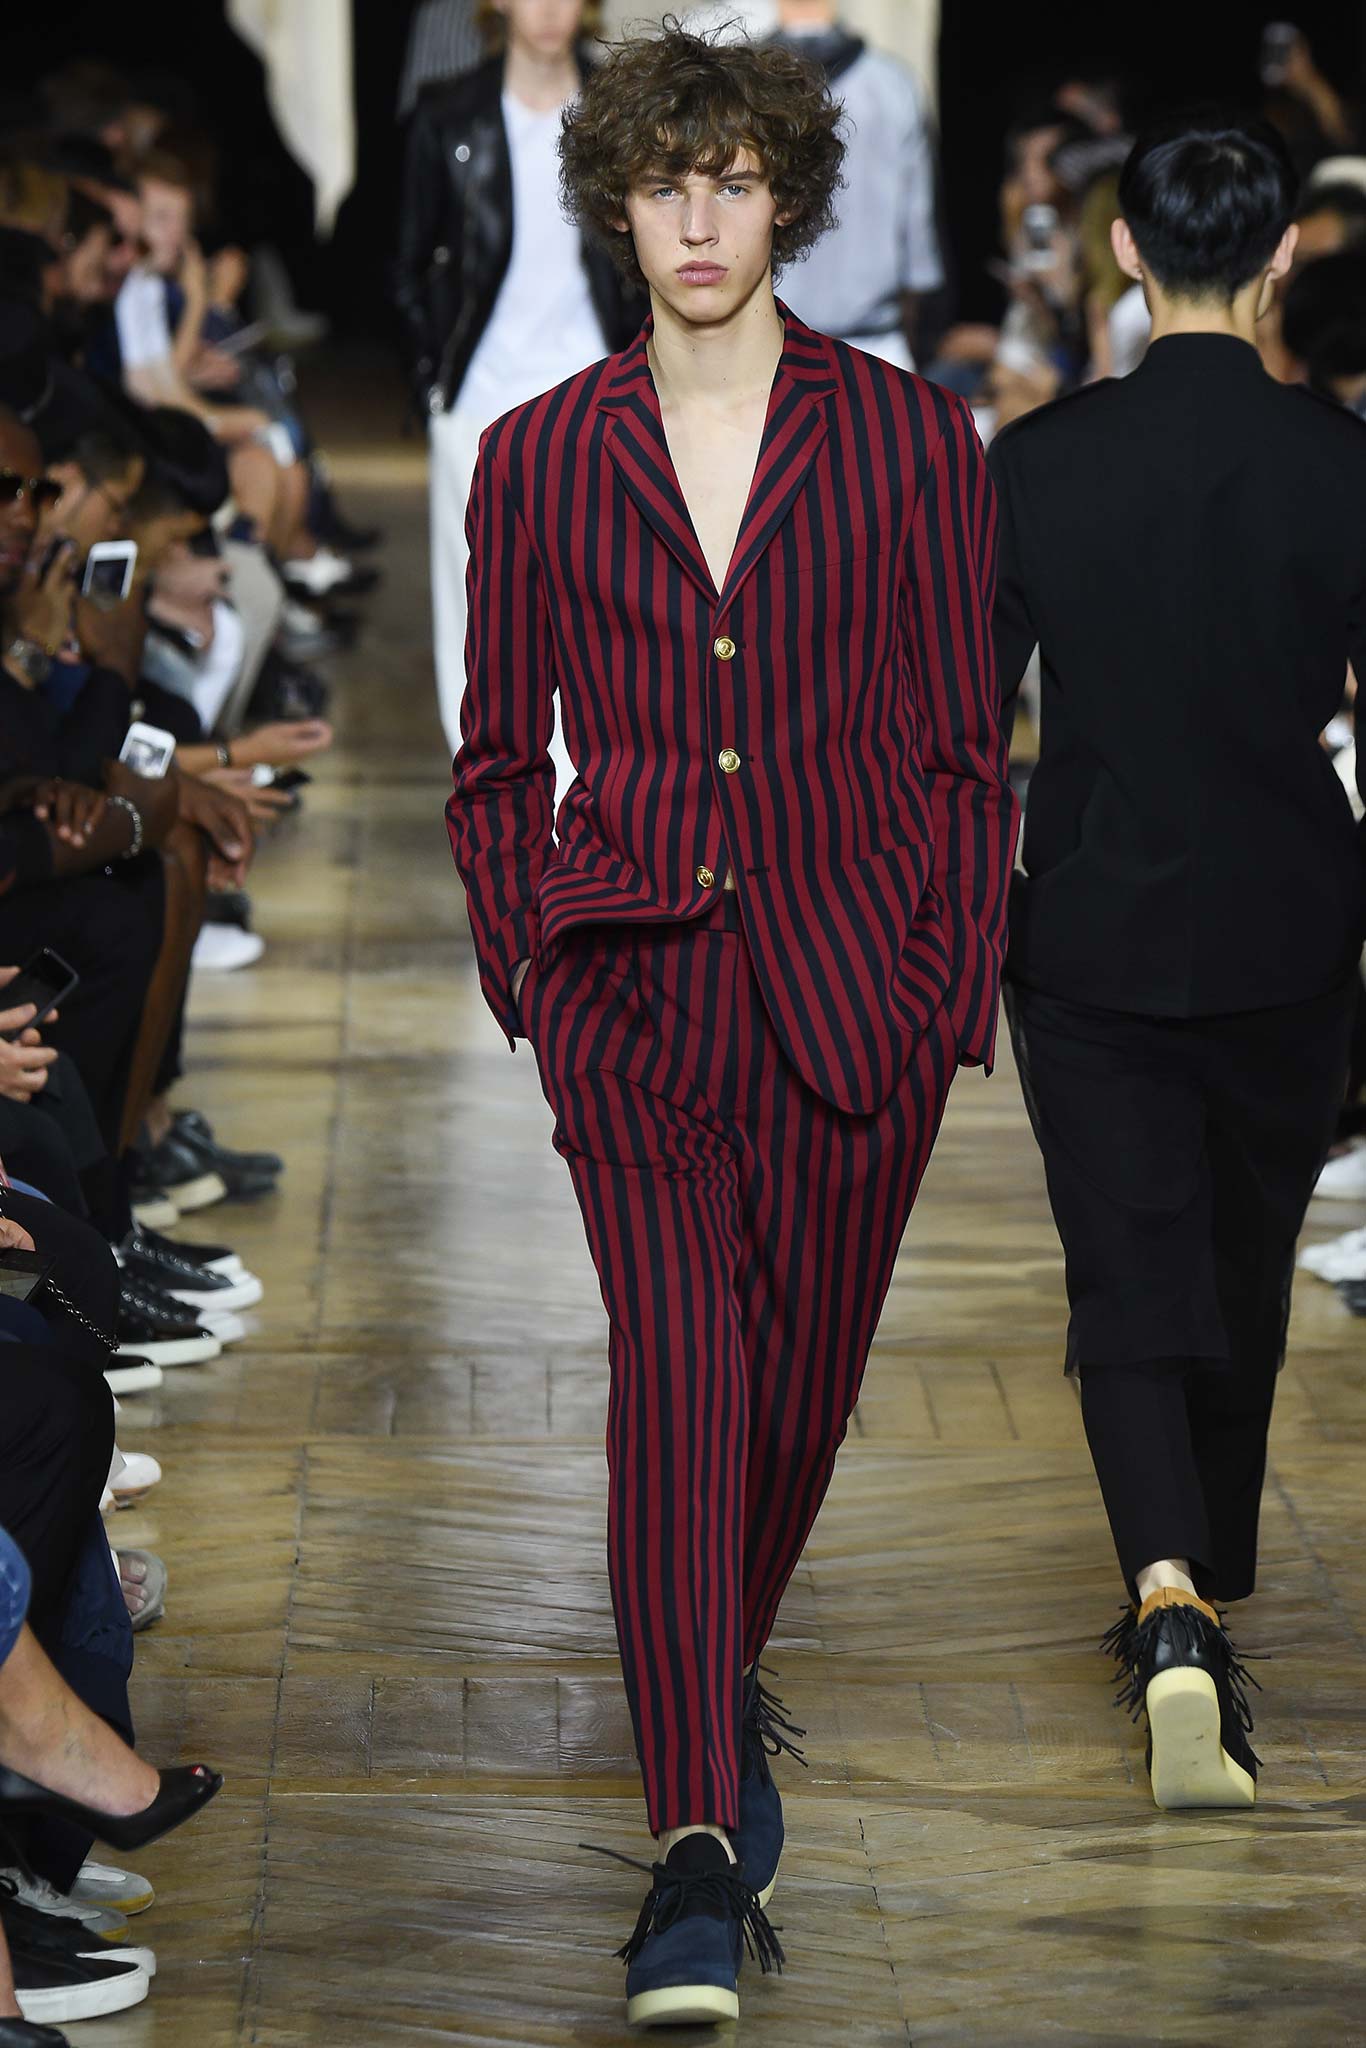 spring-2016-menswear-trends-04-long-striped-suits-07